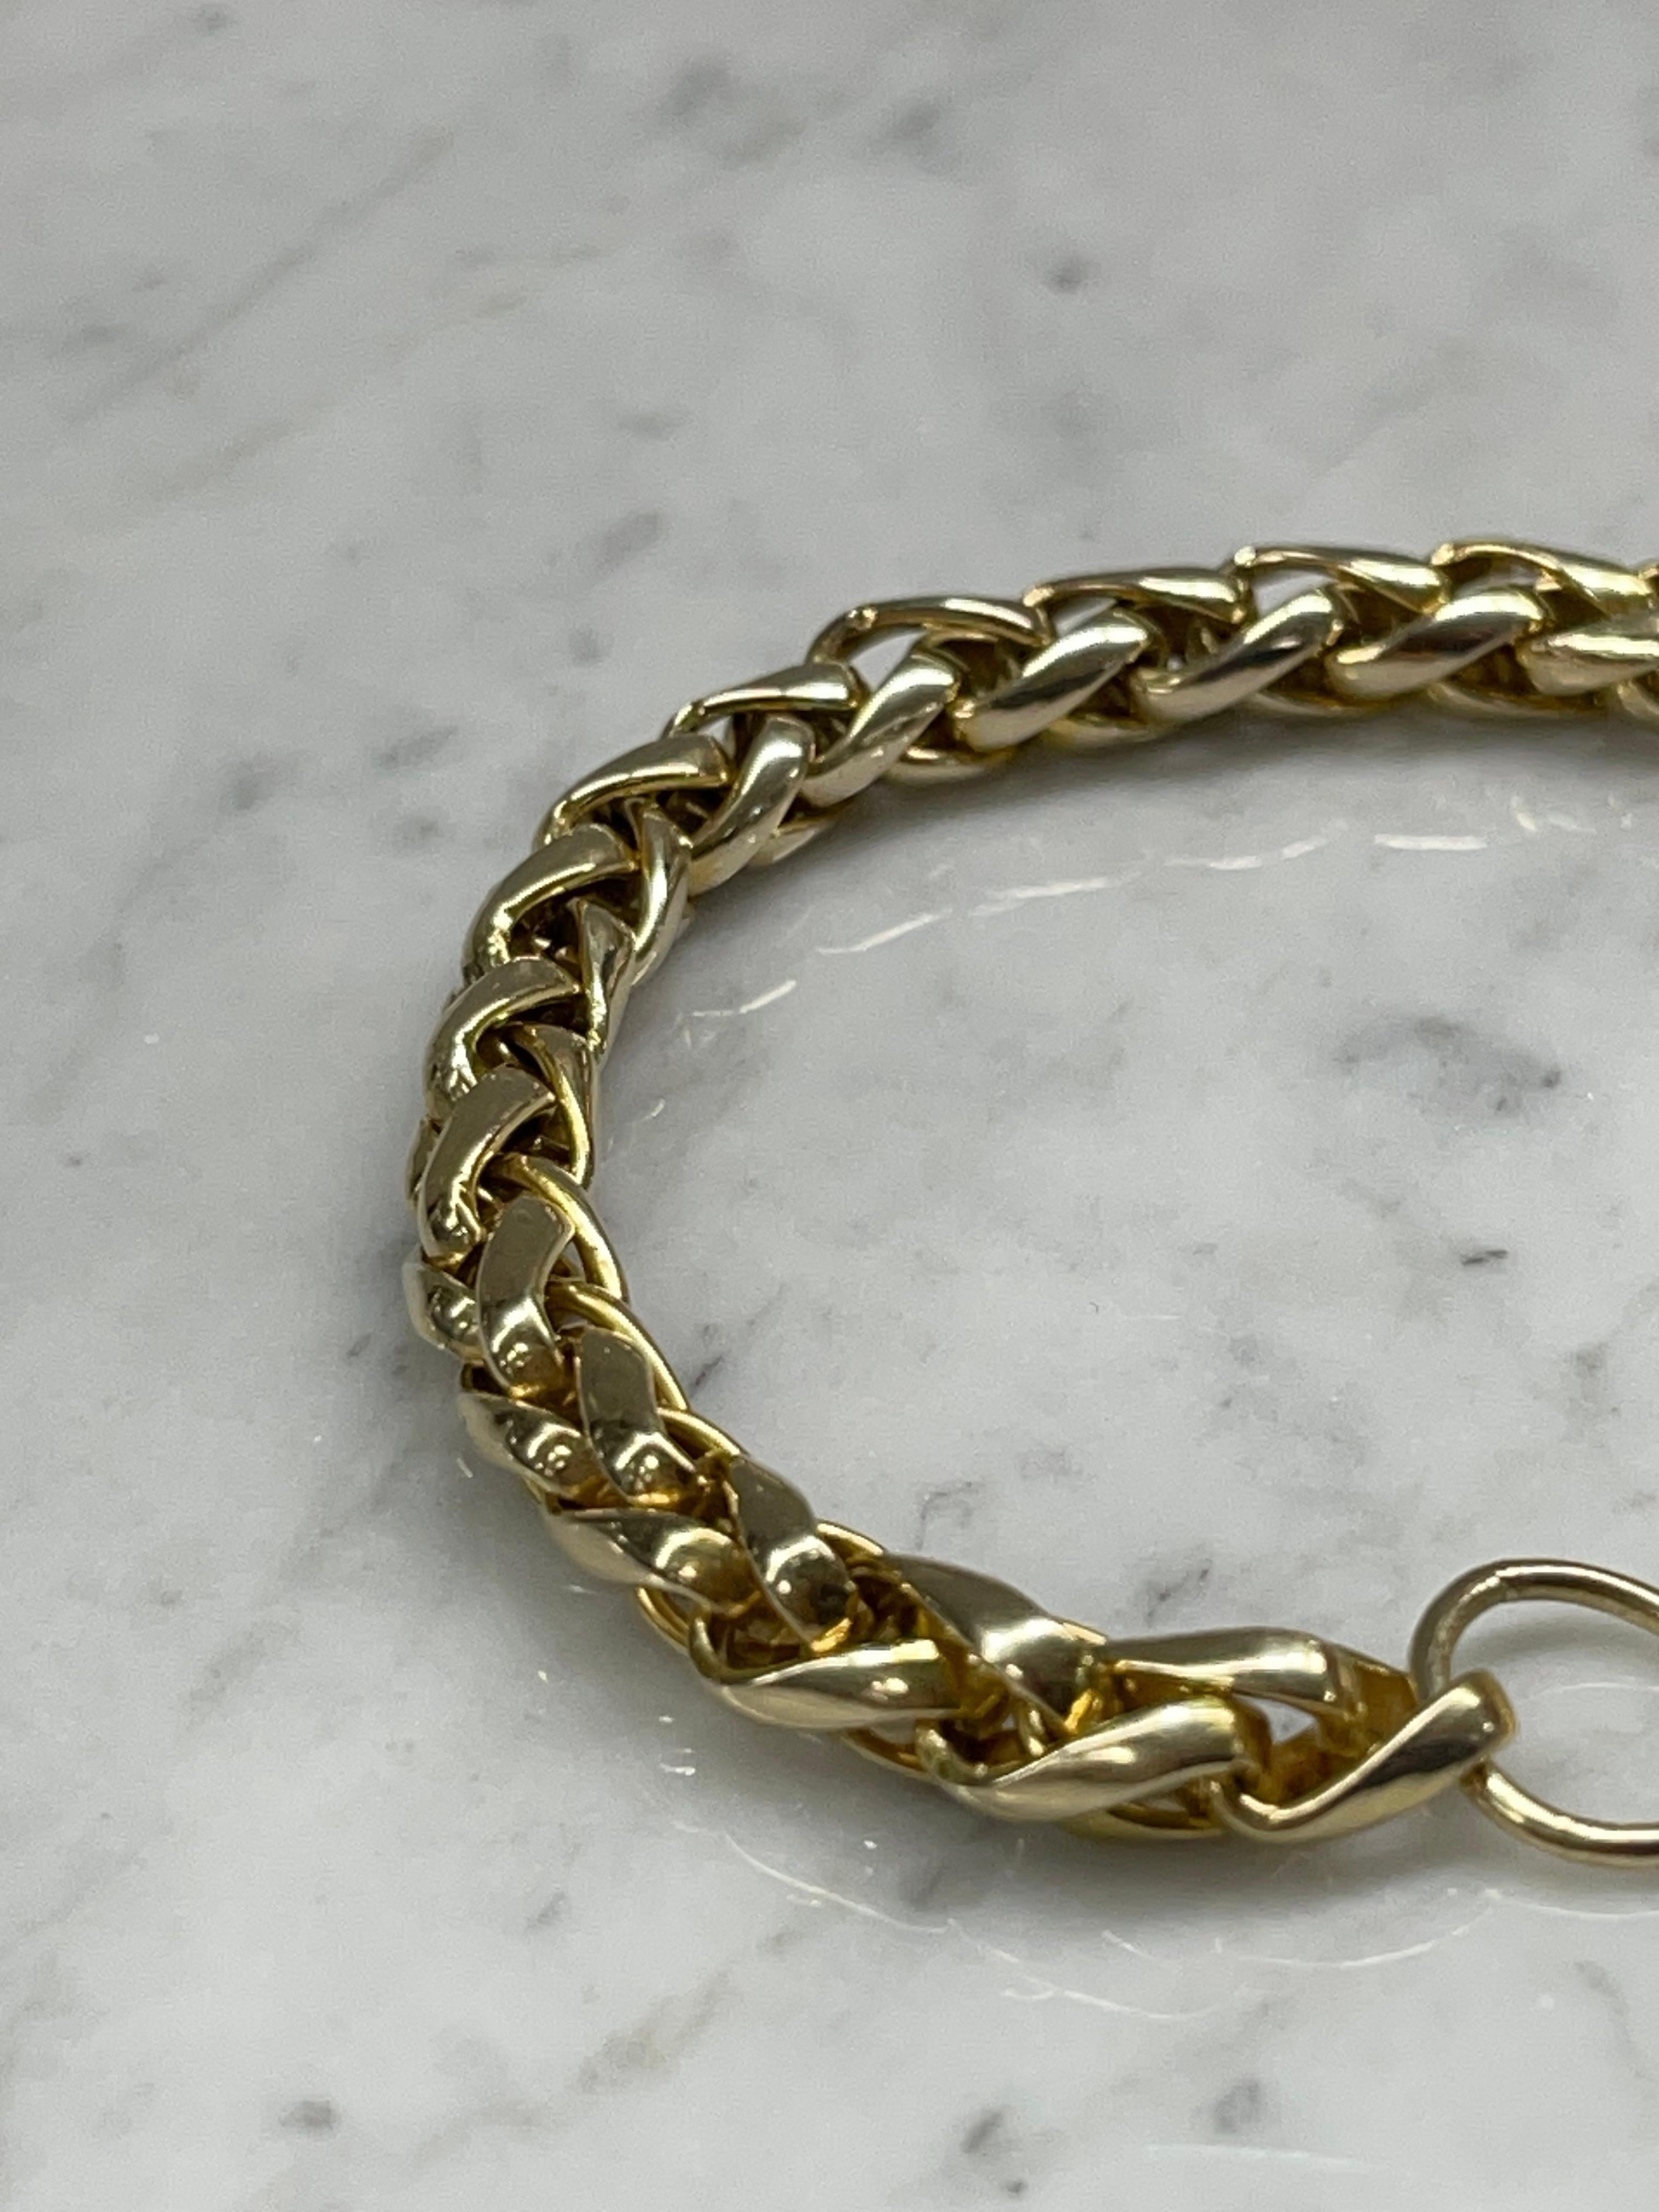 Make a statement or complete an outfit with this long link bracelet in 18K Yellow Gold. The length is currently at 7.75